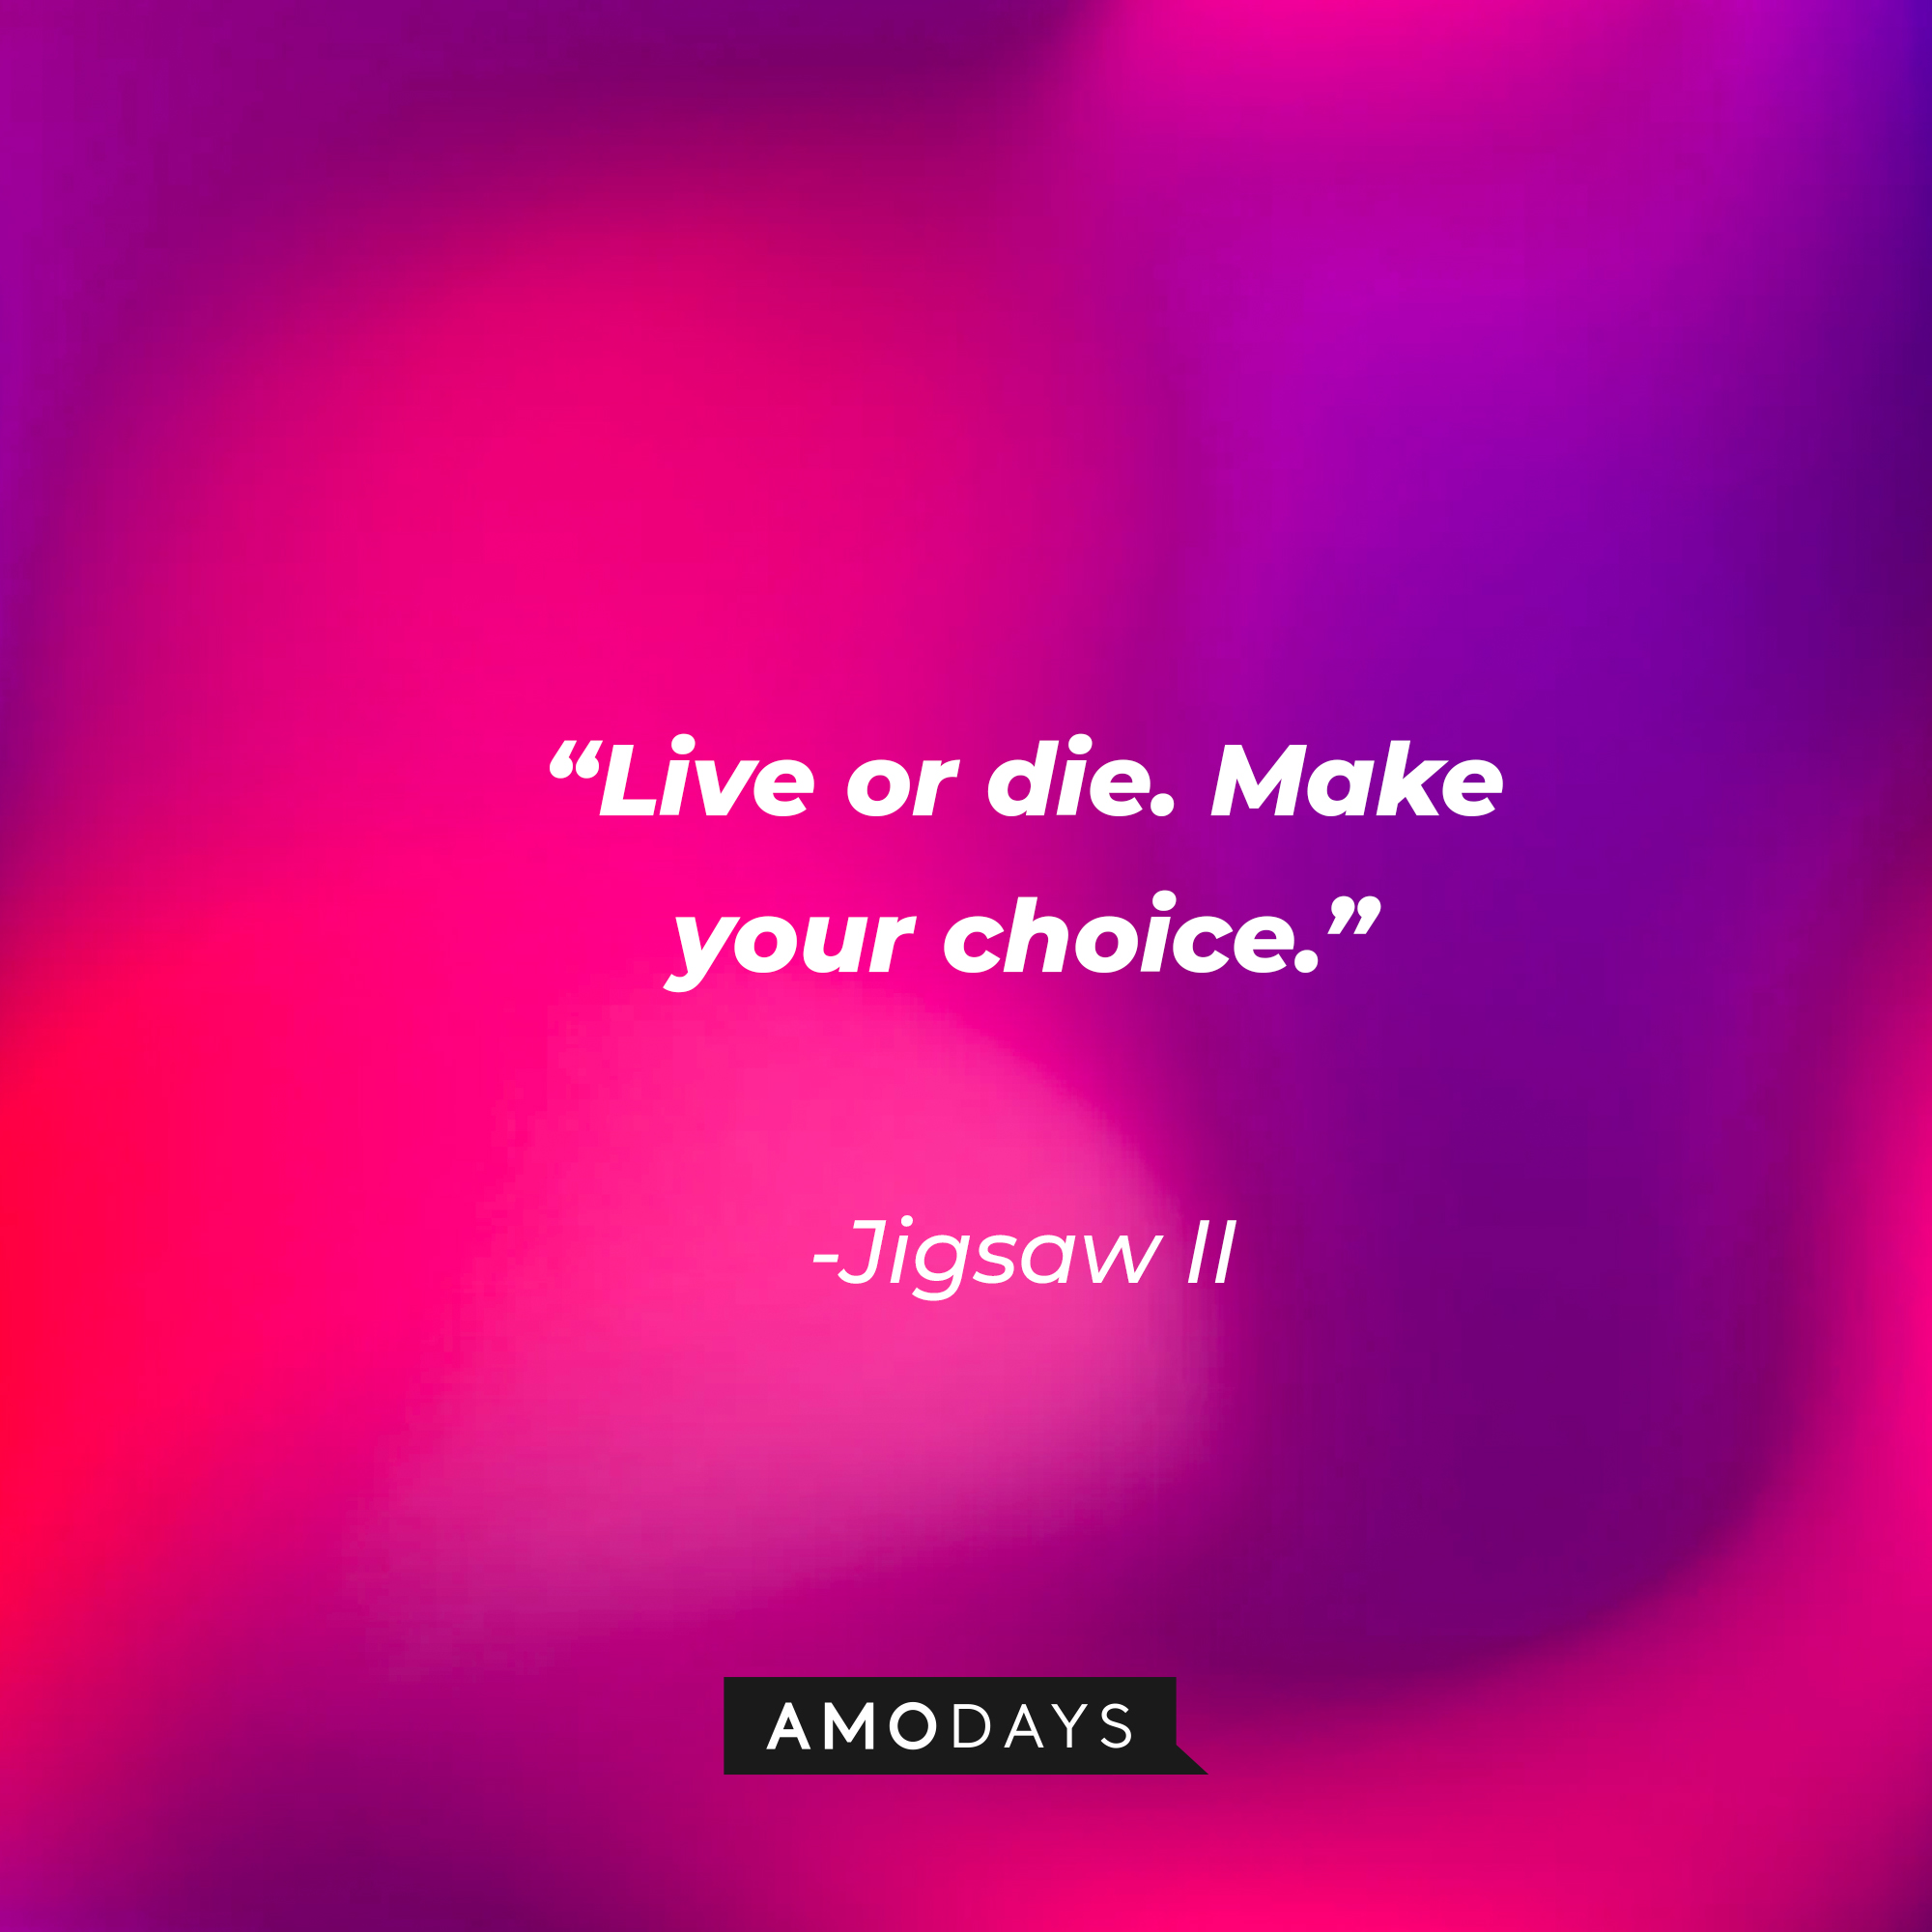 Jigsaw II's quote: "Live or die. Make your choice."  | Source: Amodays